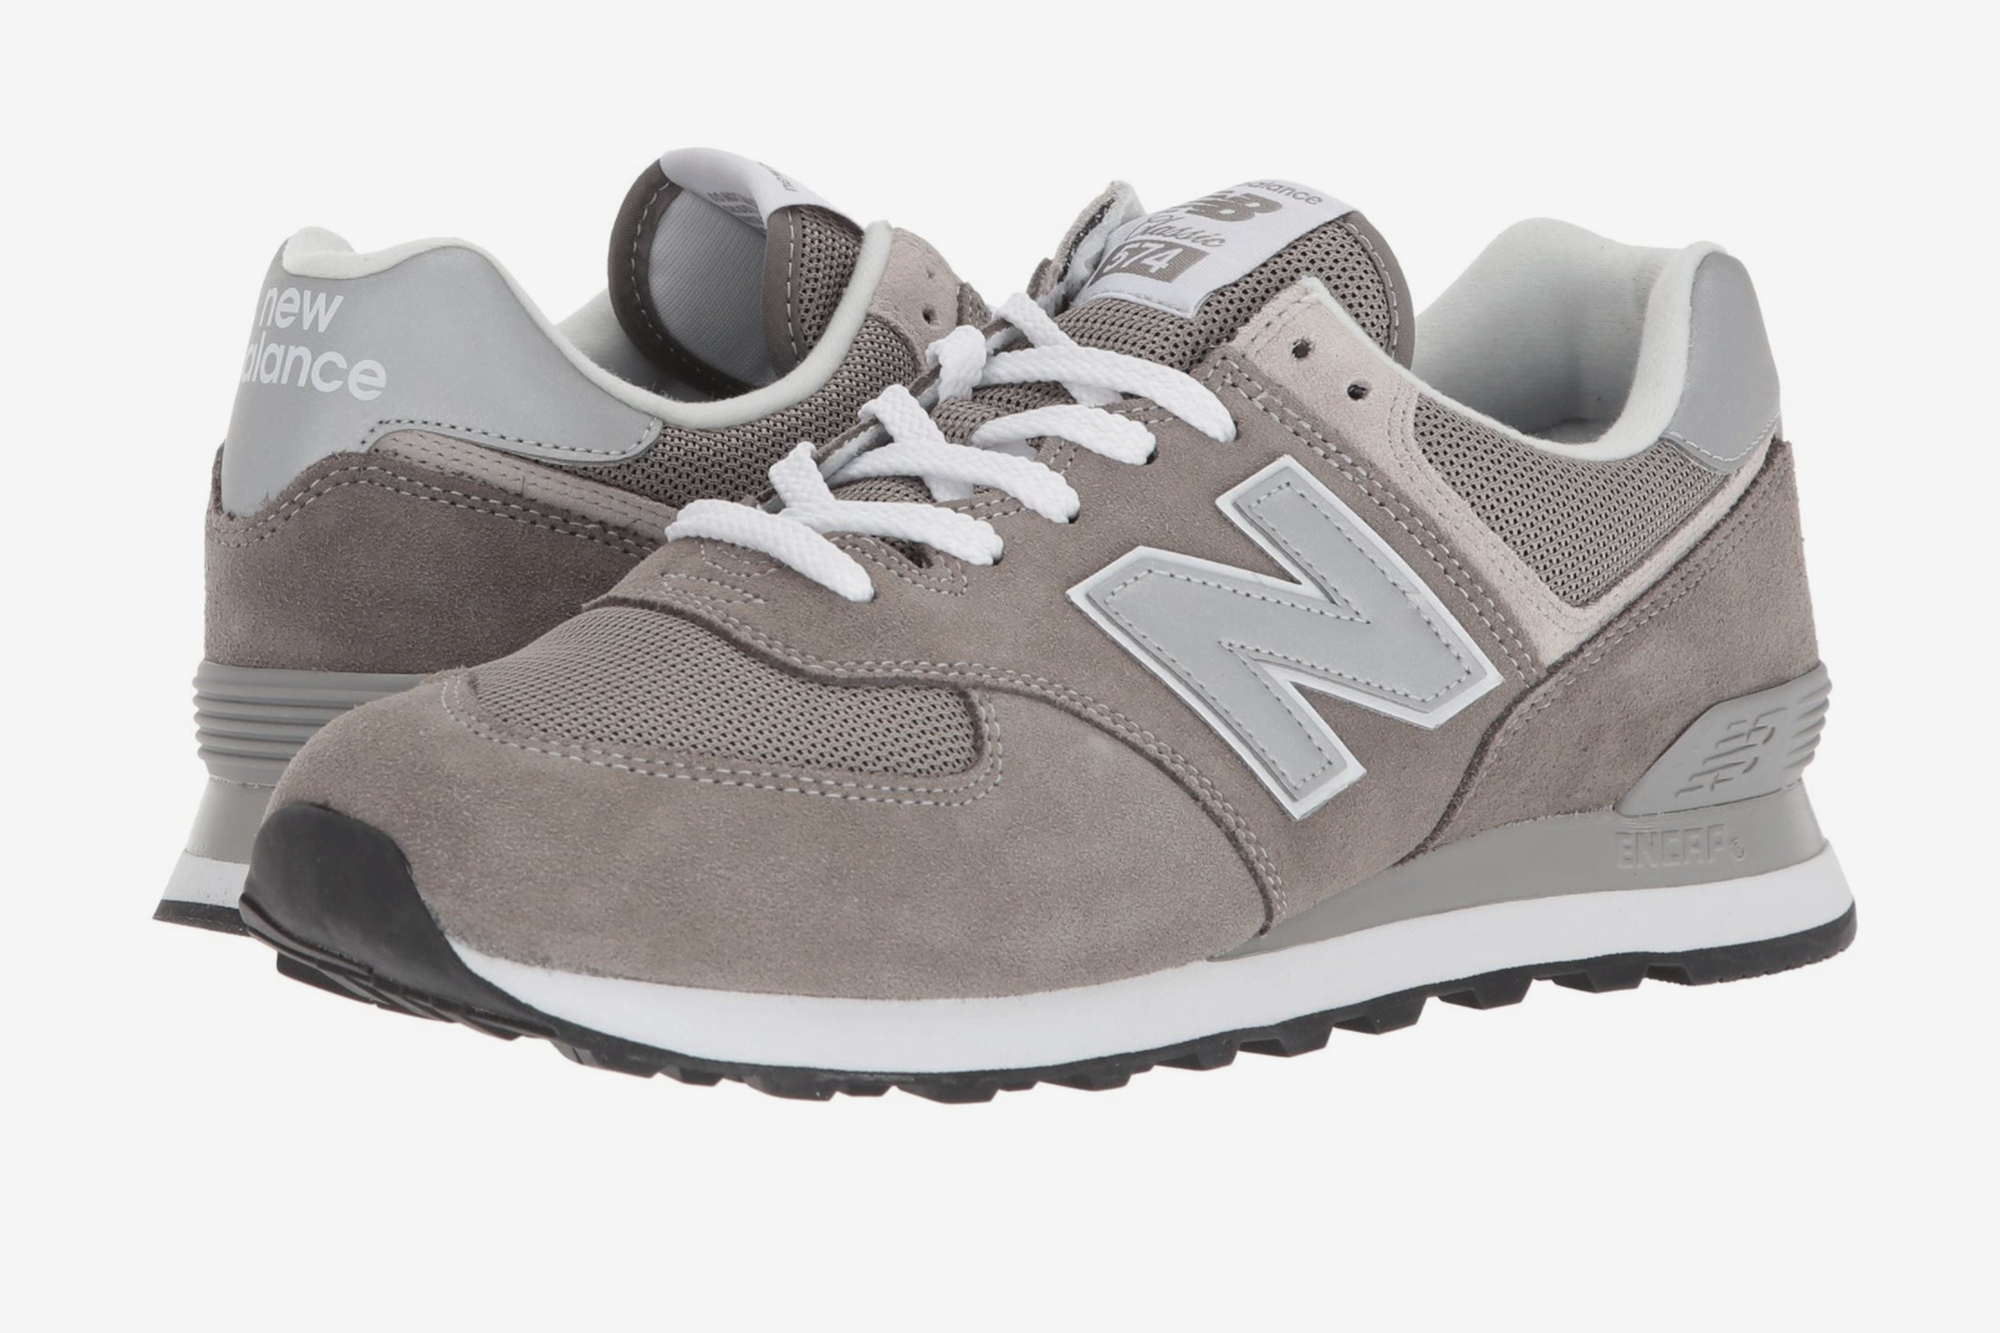 Productivo suma Christchurch These Neutral New Balance Sneakers Are Your New Go-To Shoes!